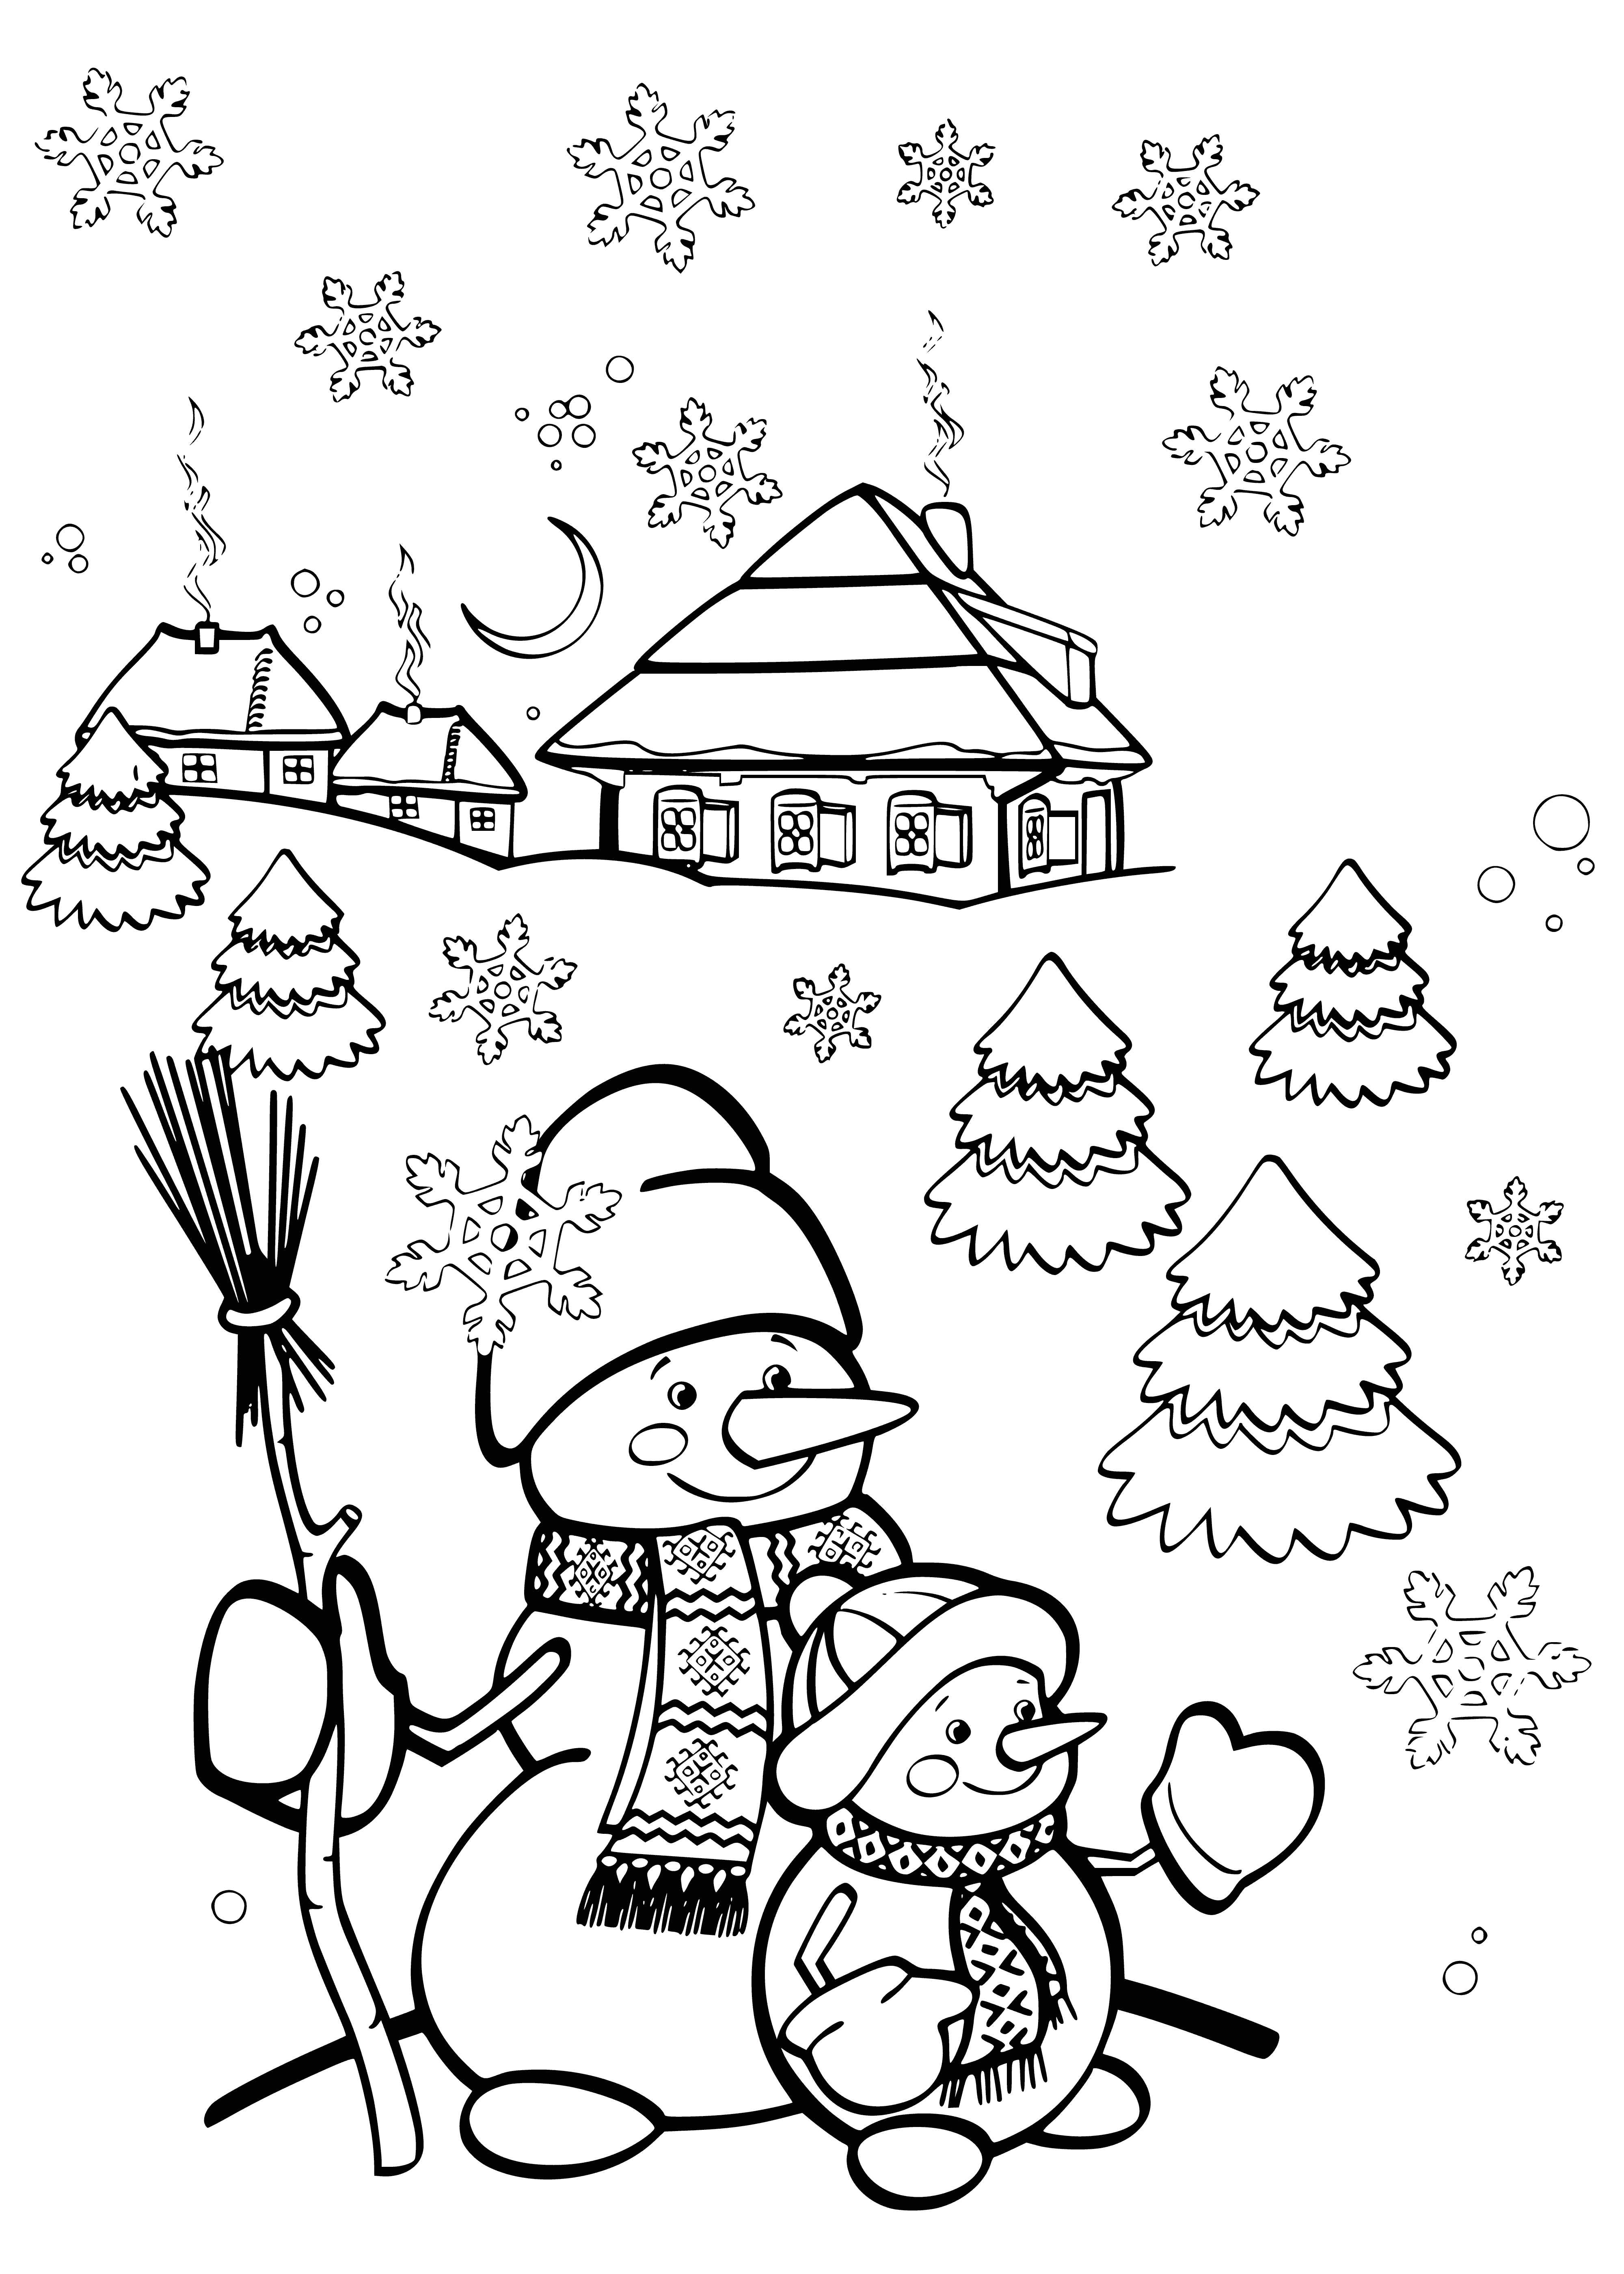 3 snowmen of diff. sizes have carrot, branch & button noses & hats; coal eyes & mouths; sticks for arms. #KidCraft #ColoringPage